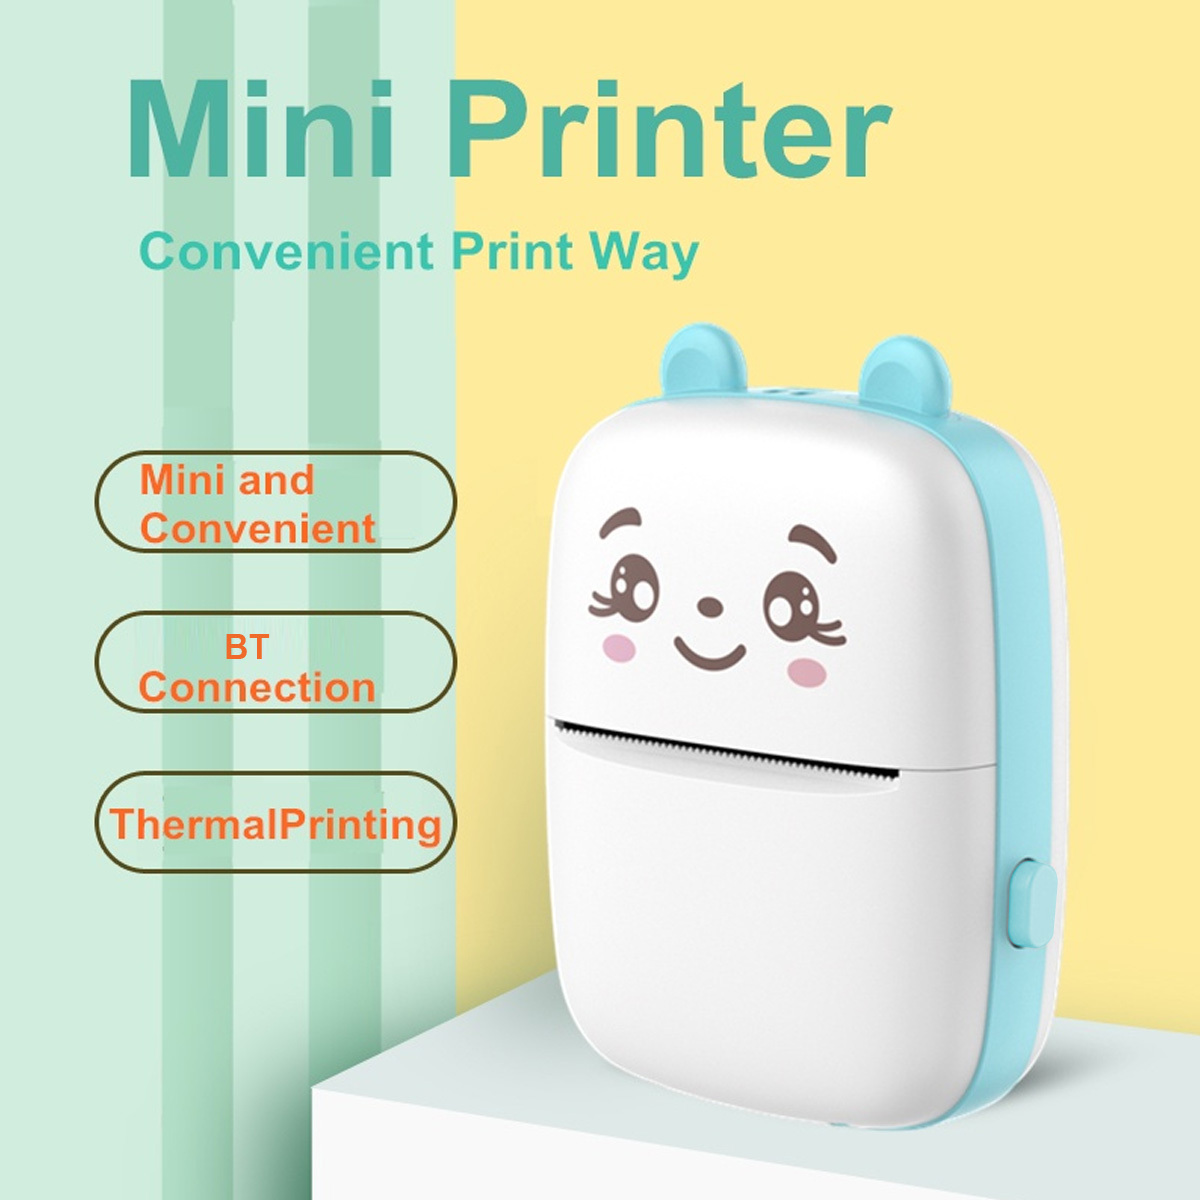 mini photo printer portable thermal printer for app inkless printer gift for kids friends used in home office study work list printing details 0